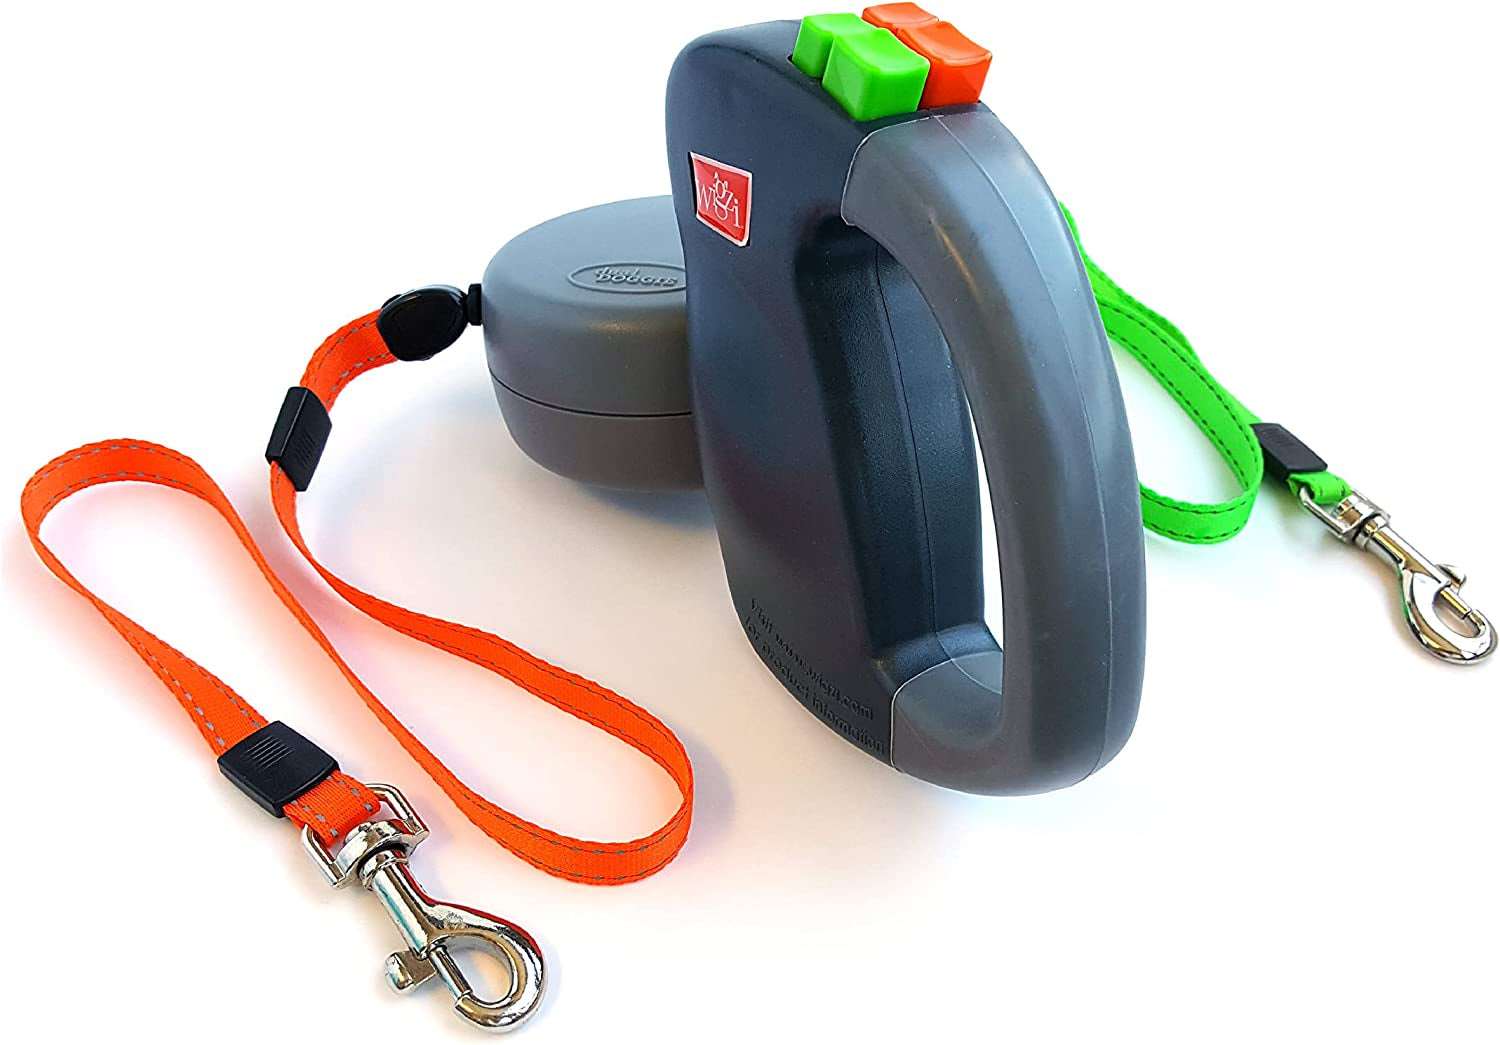 Two Dog Reflective Retractable Pet Leash Reflective Orange and Green Leads Dual Lock Tangle-Free